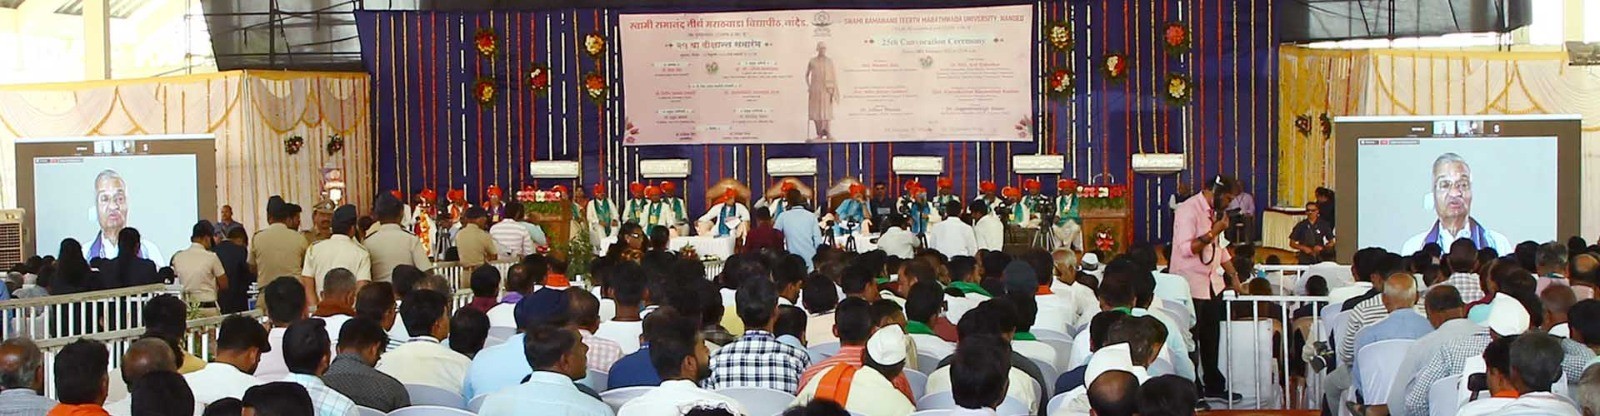 An event hosted by the university (Achieve Photo)